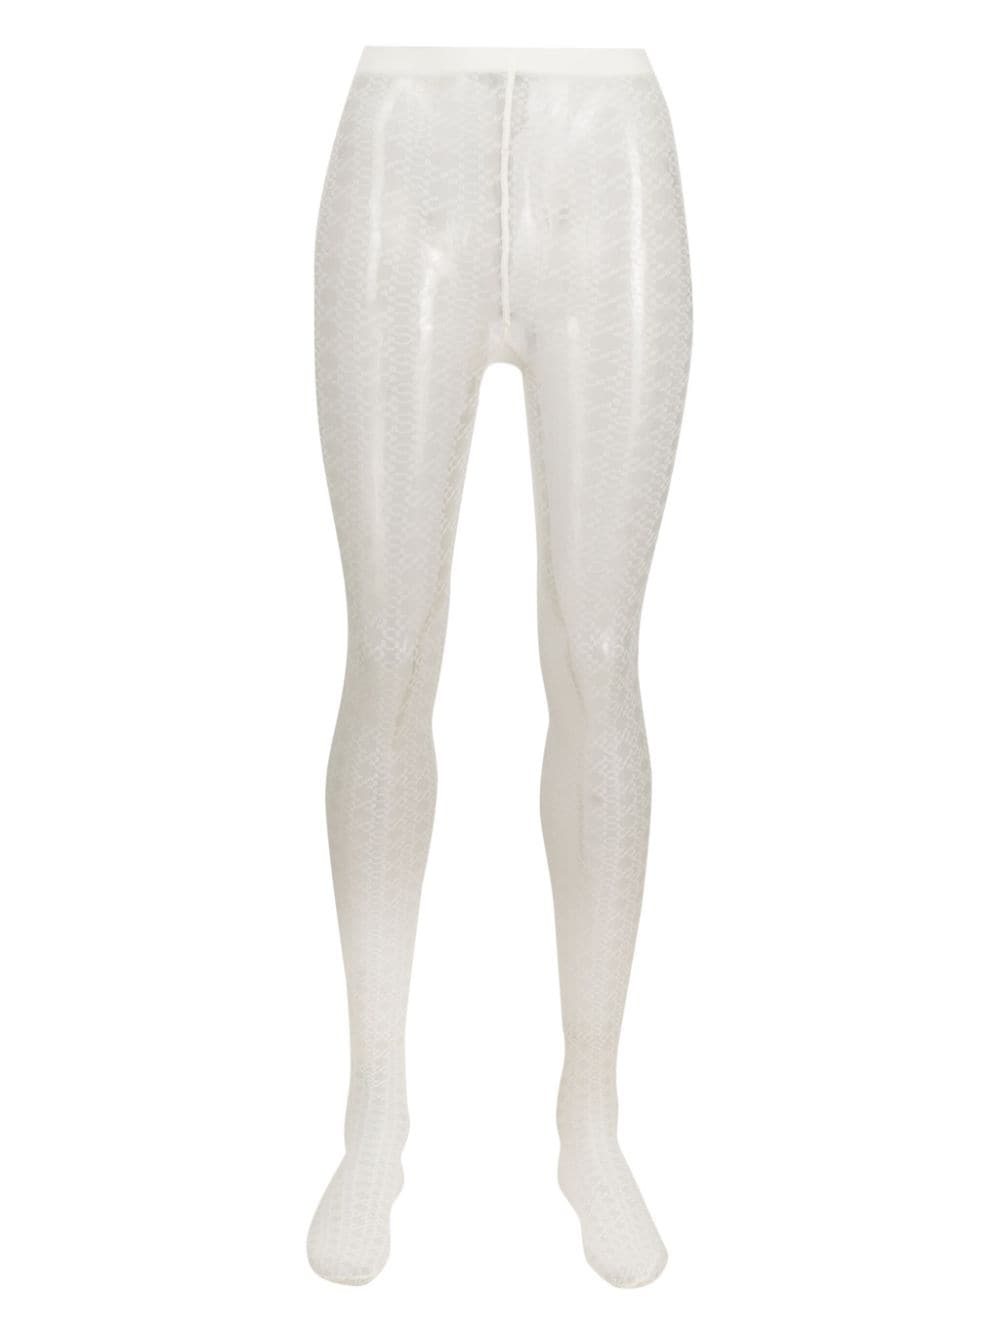 Wolford Individual 10 sheer tights - White von Wolford